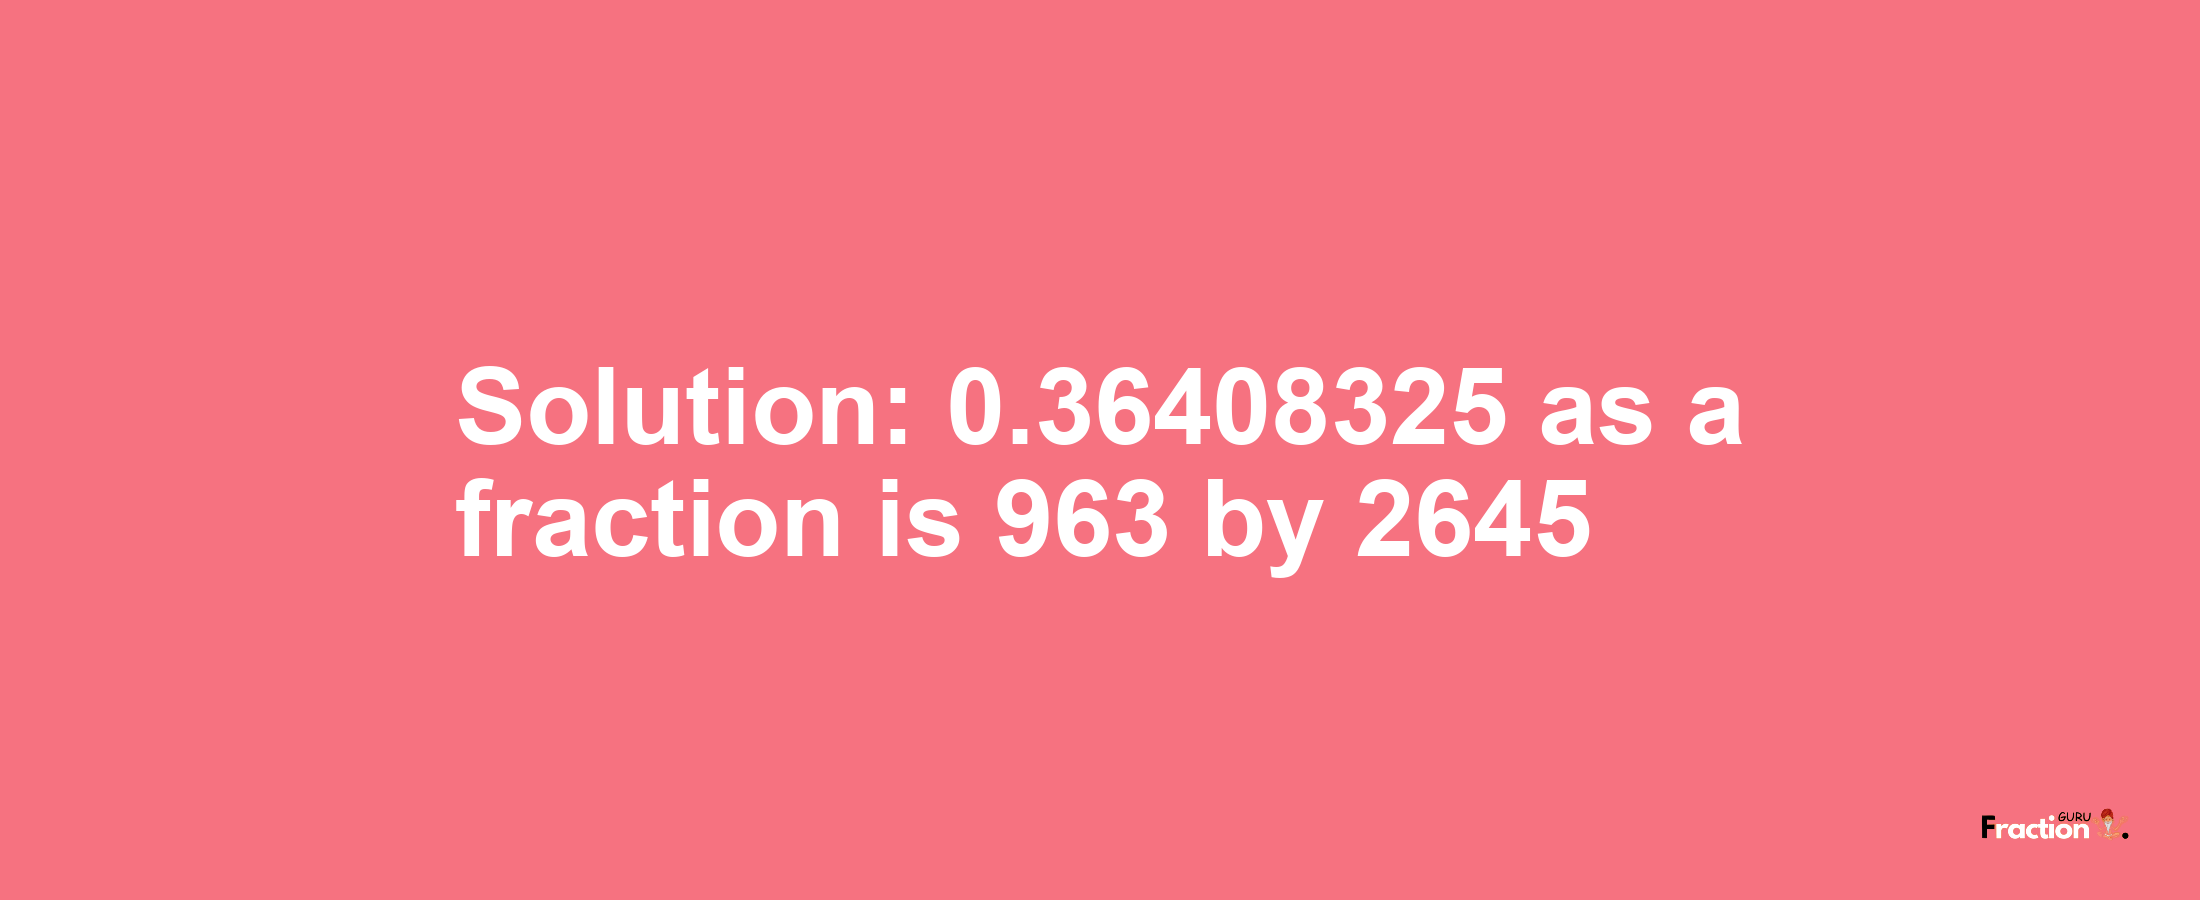 Solution:0.36408325 as a fraction is 963/2645